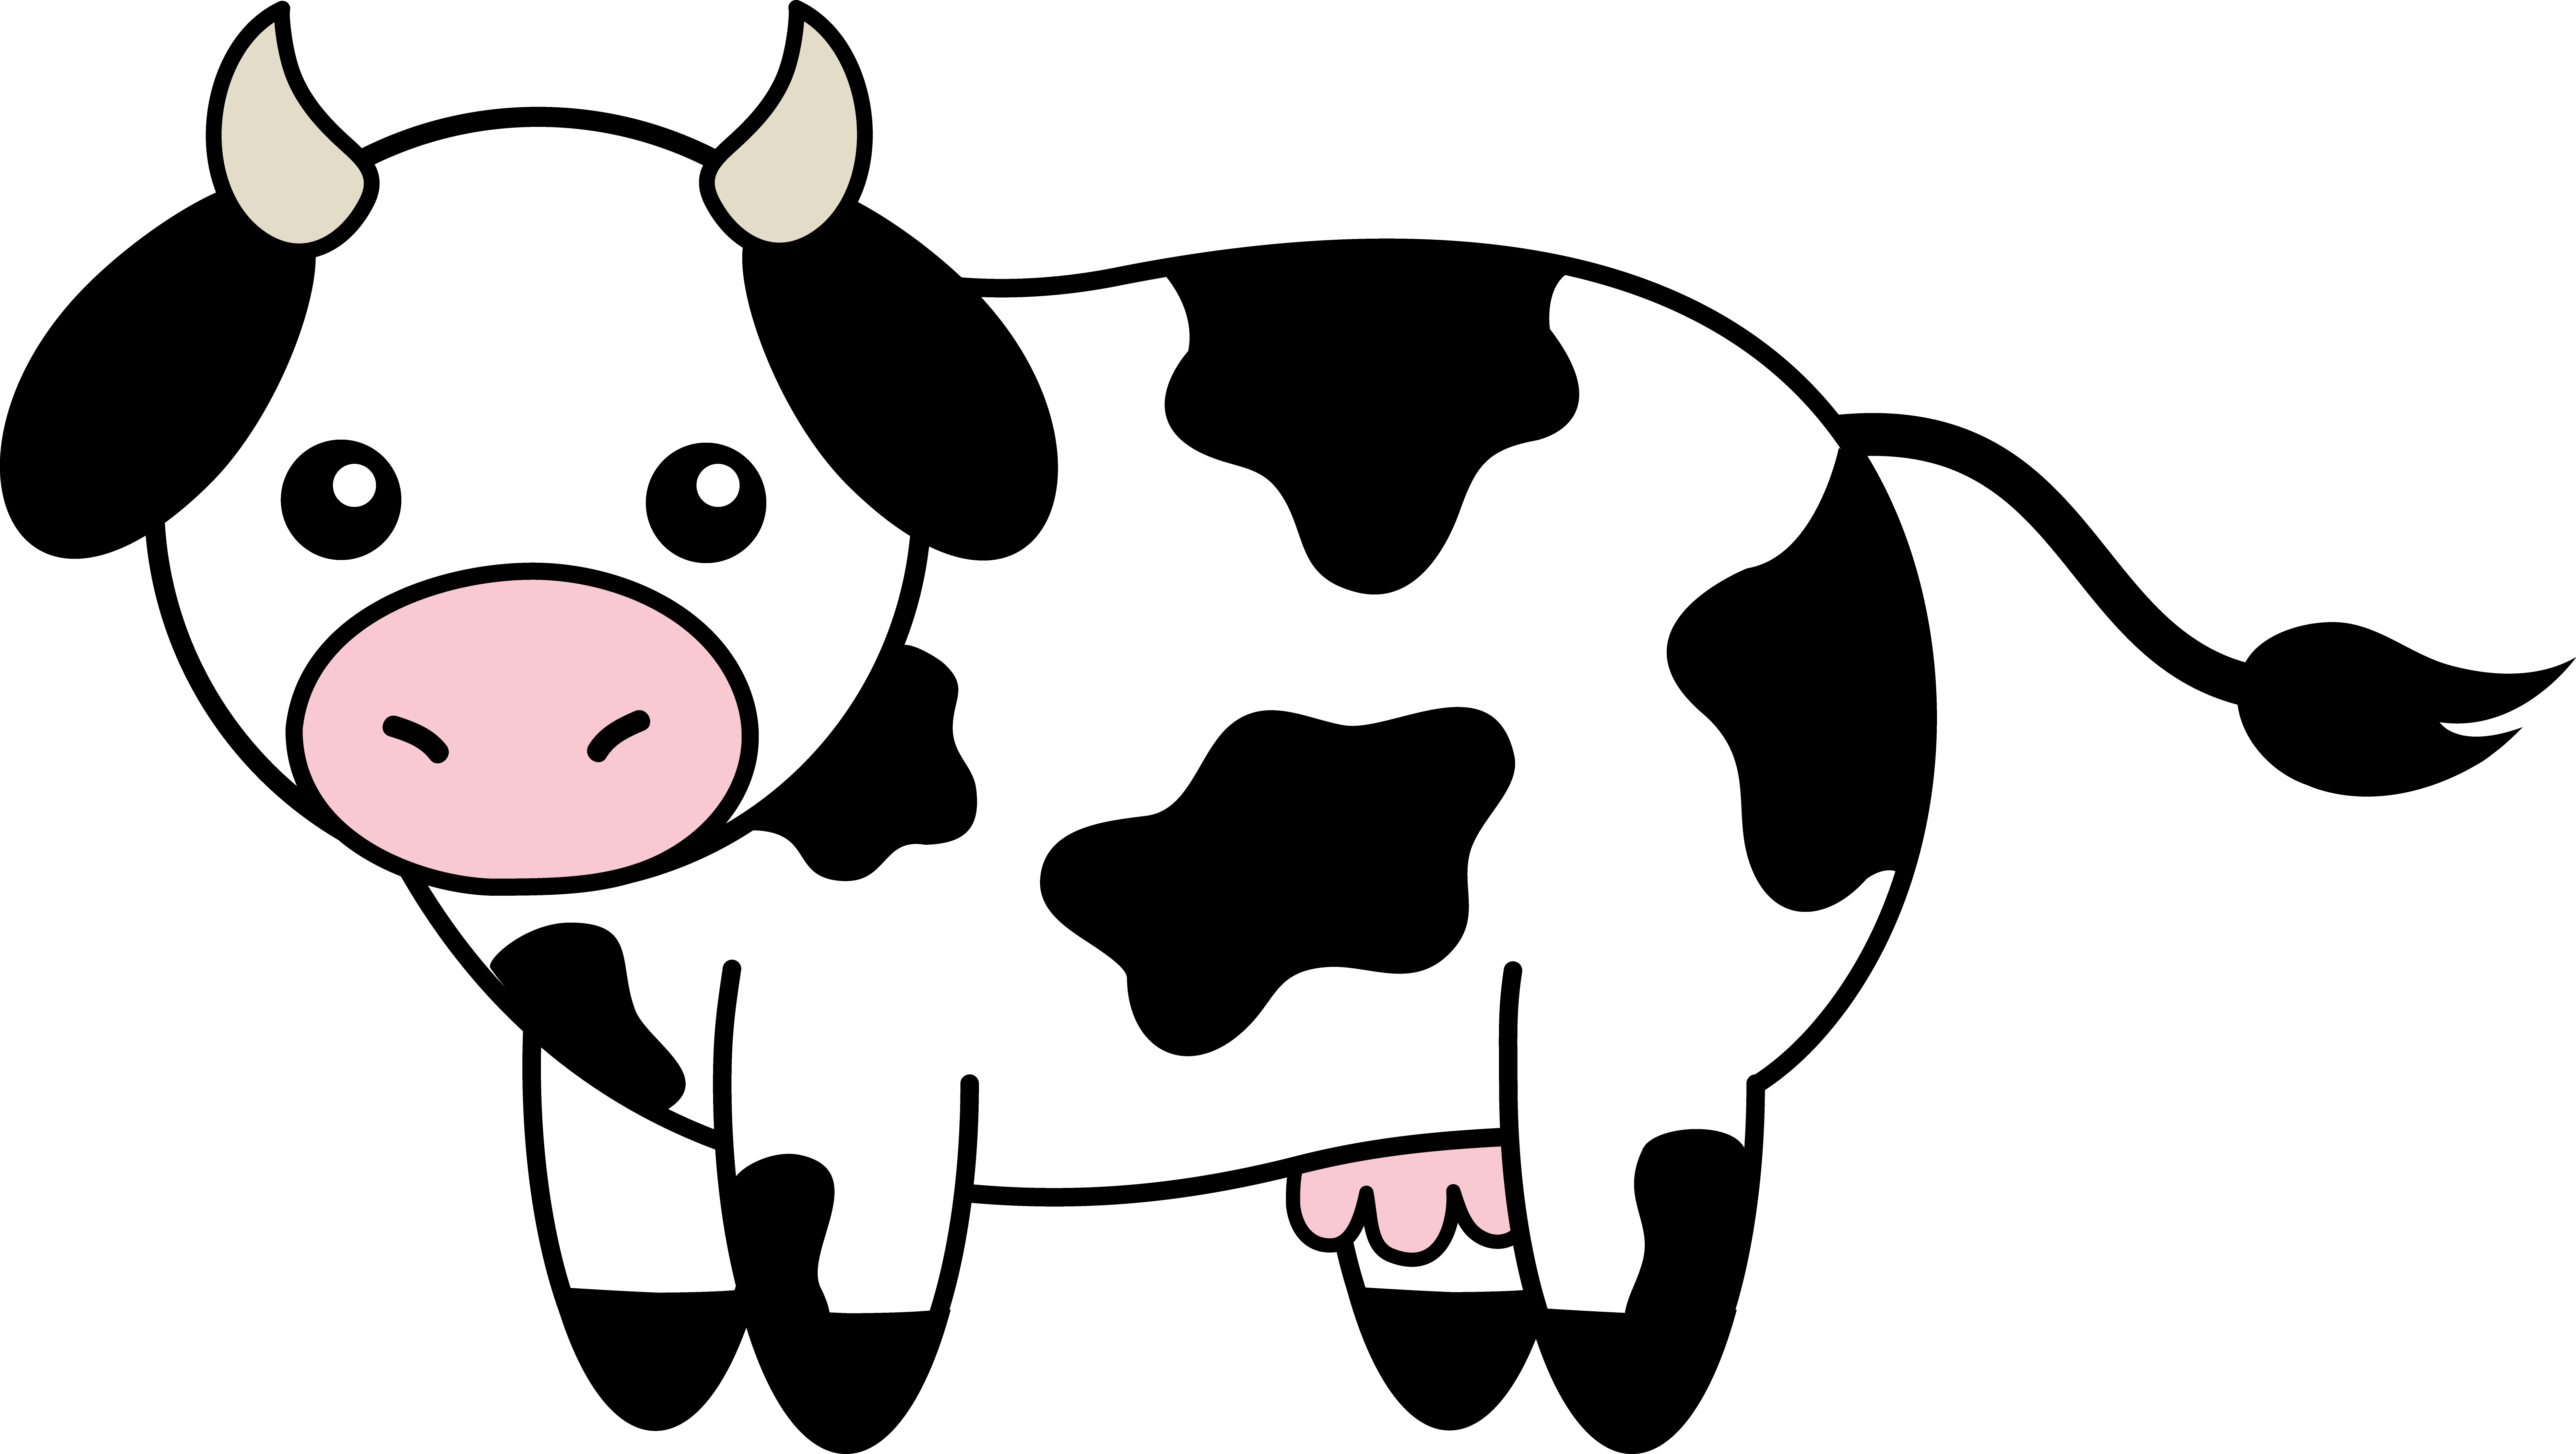 Ox clipart cute. Cow black and white